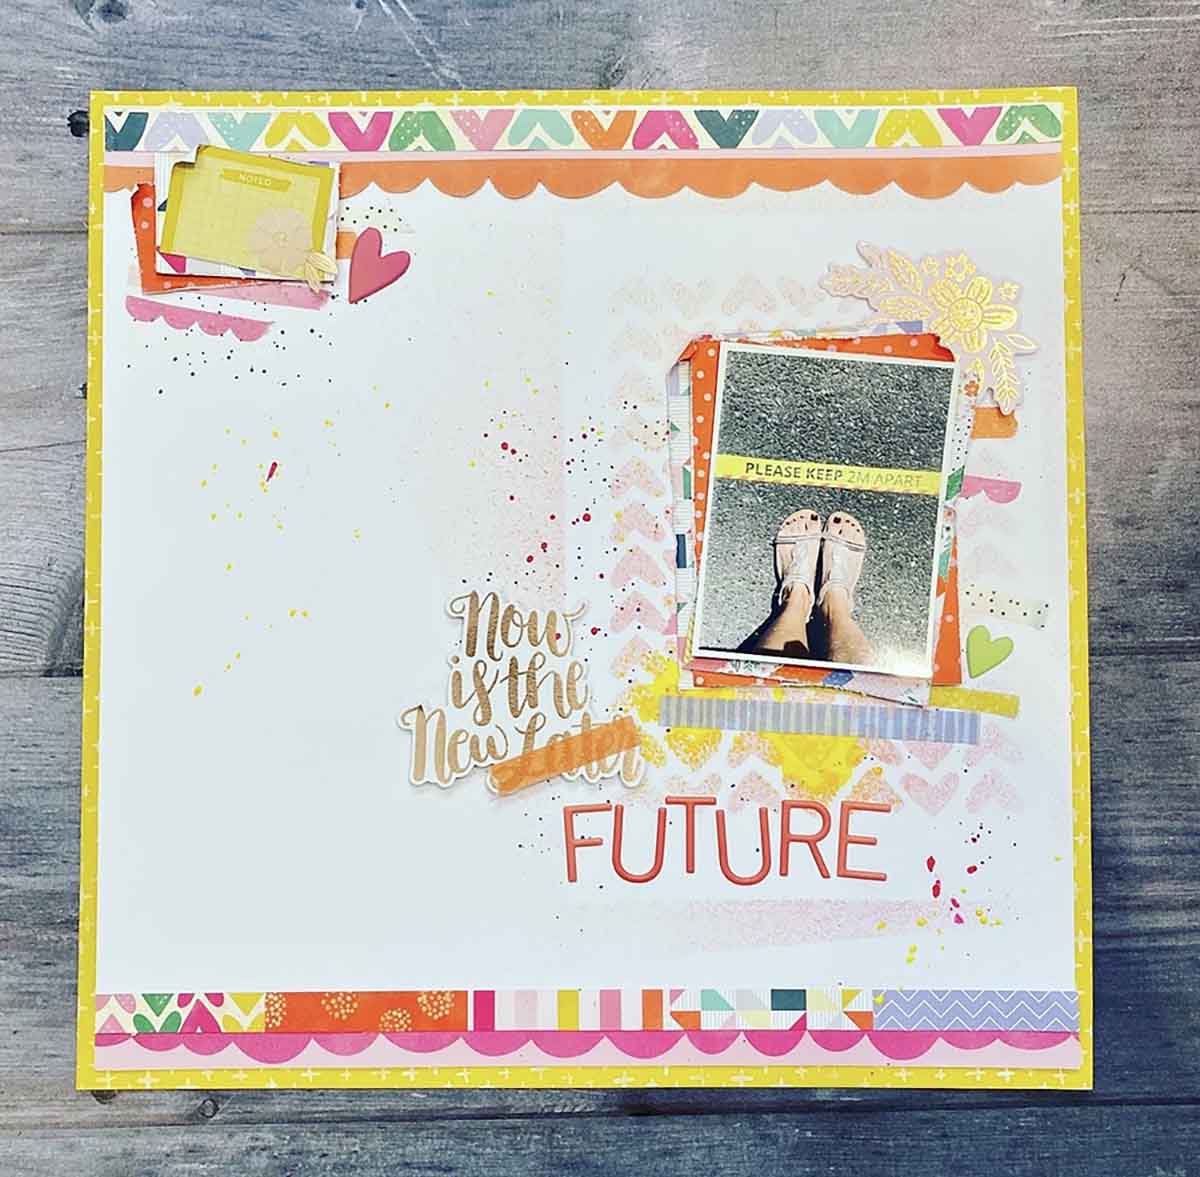 Scrapbooking lockdown social distancing layout Page created using a sketch using Paige Taylor Evans Papers in Oh my Heart